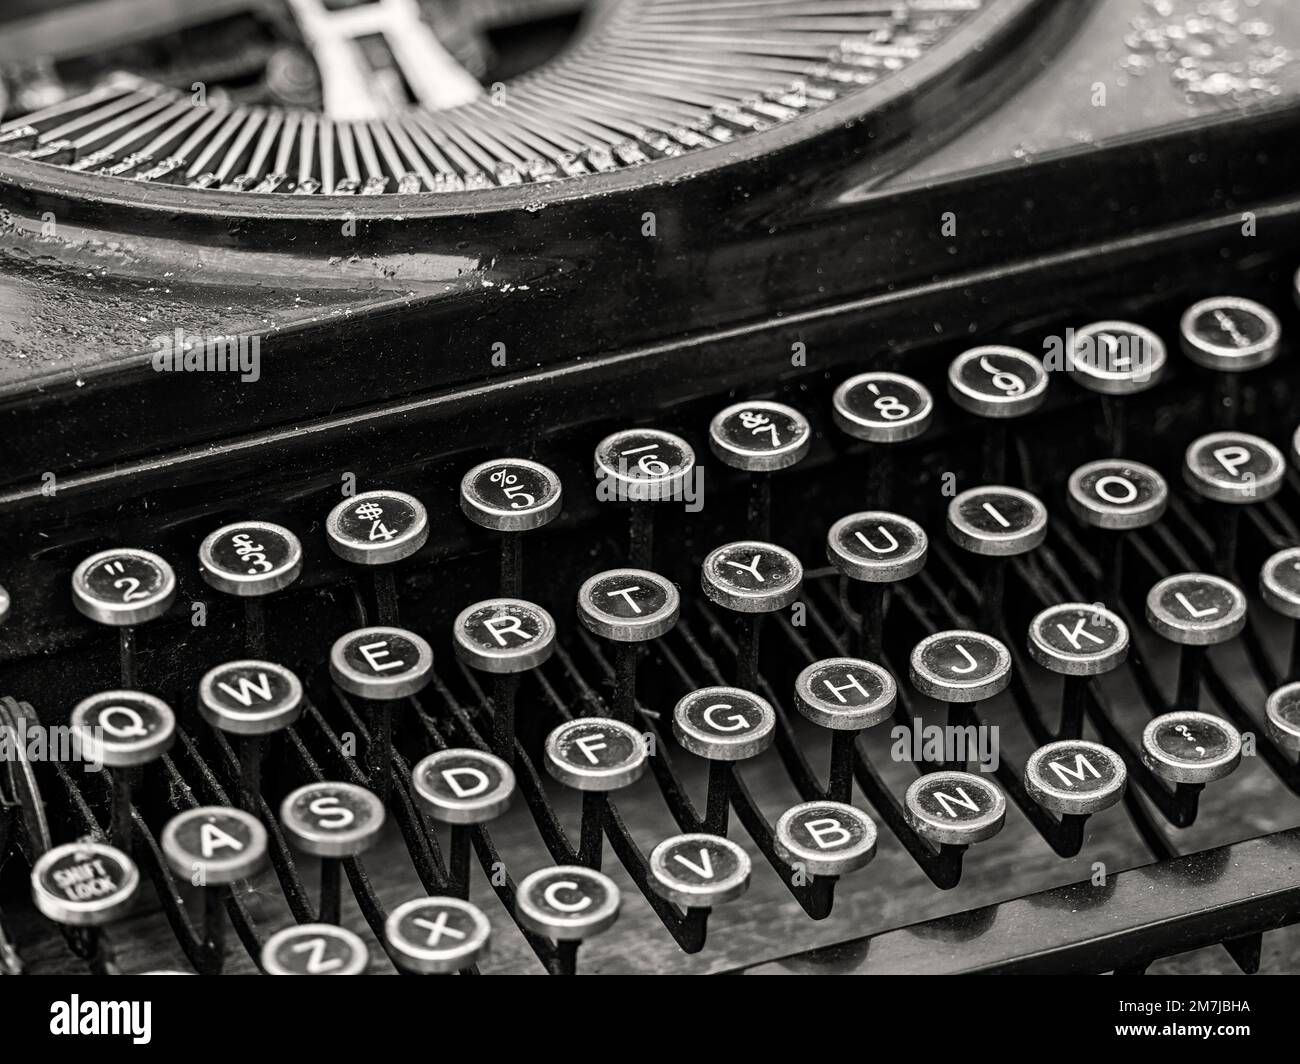 Monochrome image of an old manual portable typewriter Stock Photo